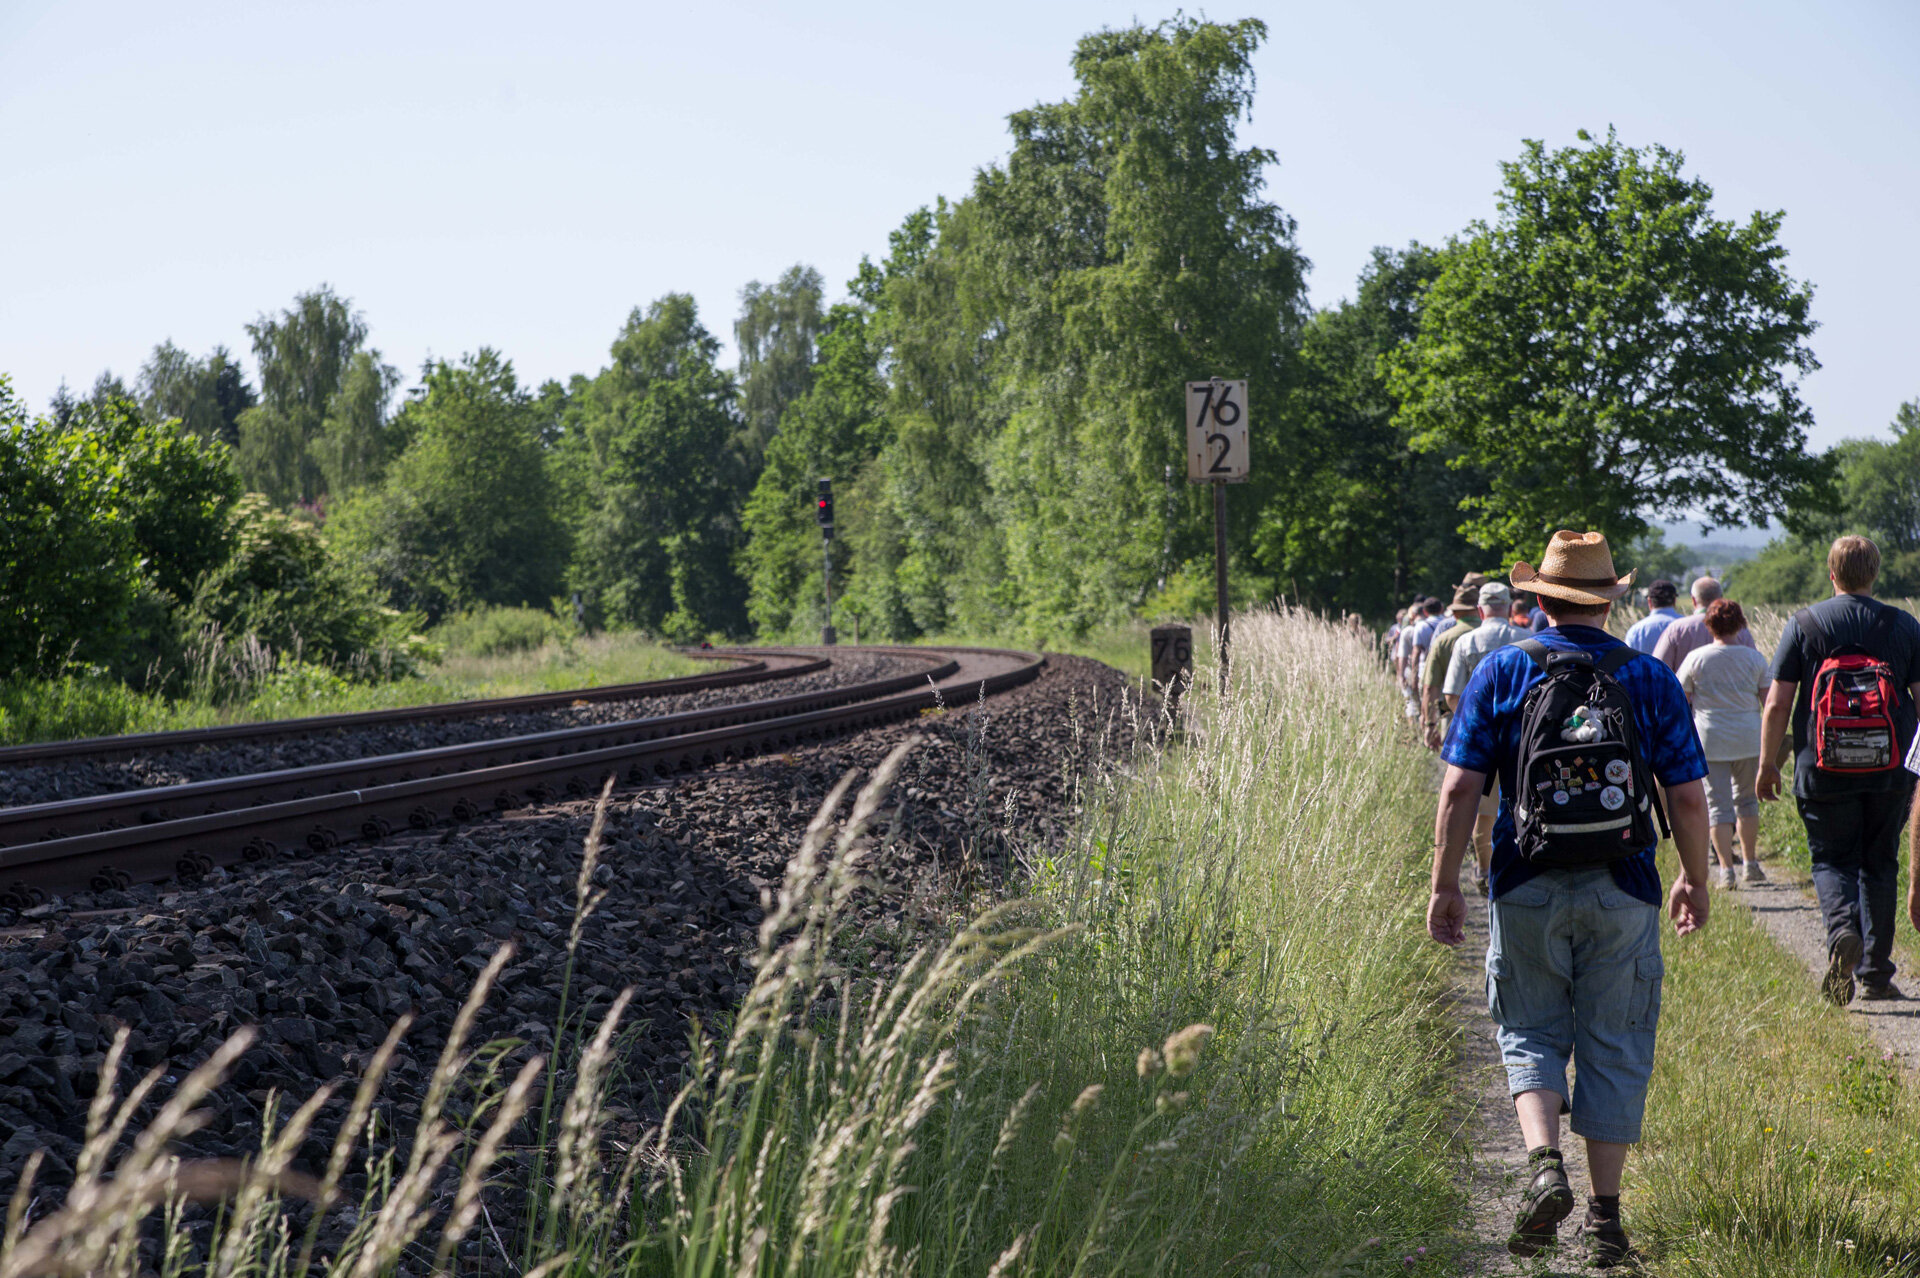 A group of hikers walking along the railway track